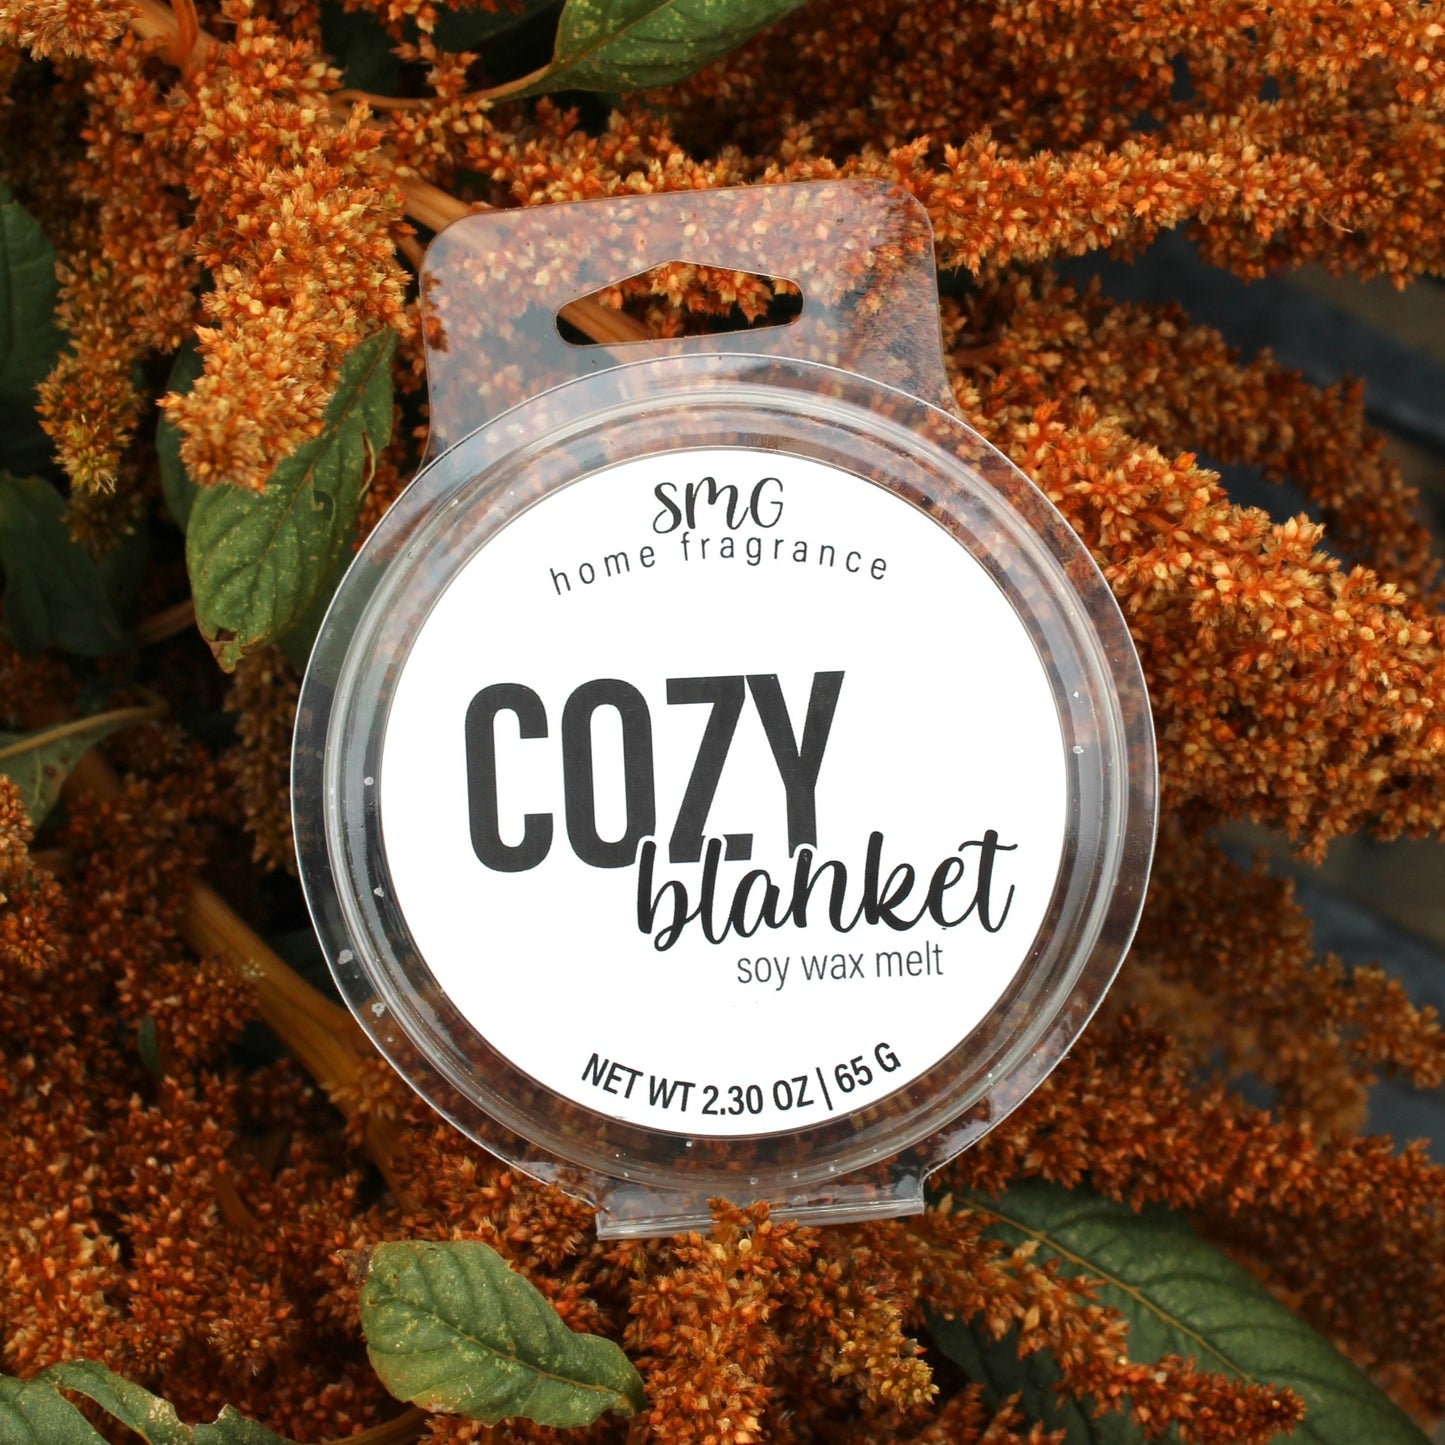 Wax Melts by SMG Home Fragrance